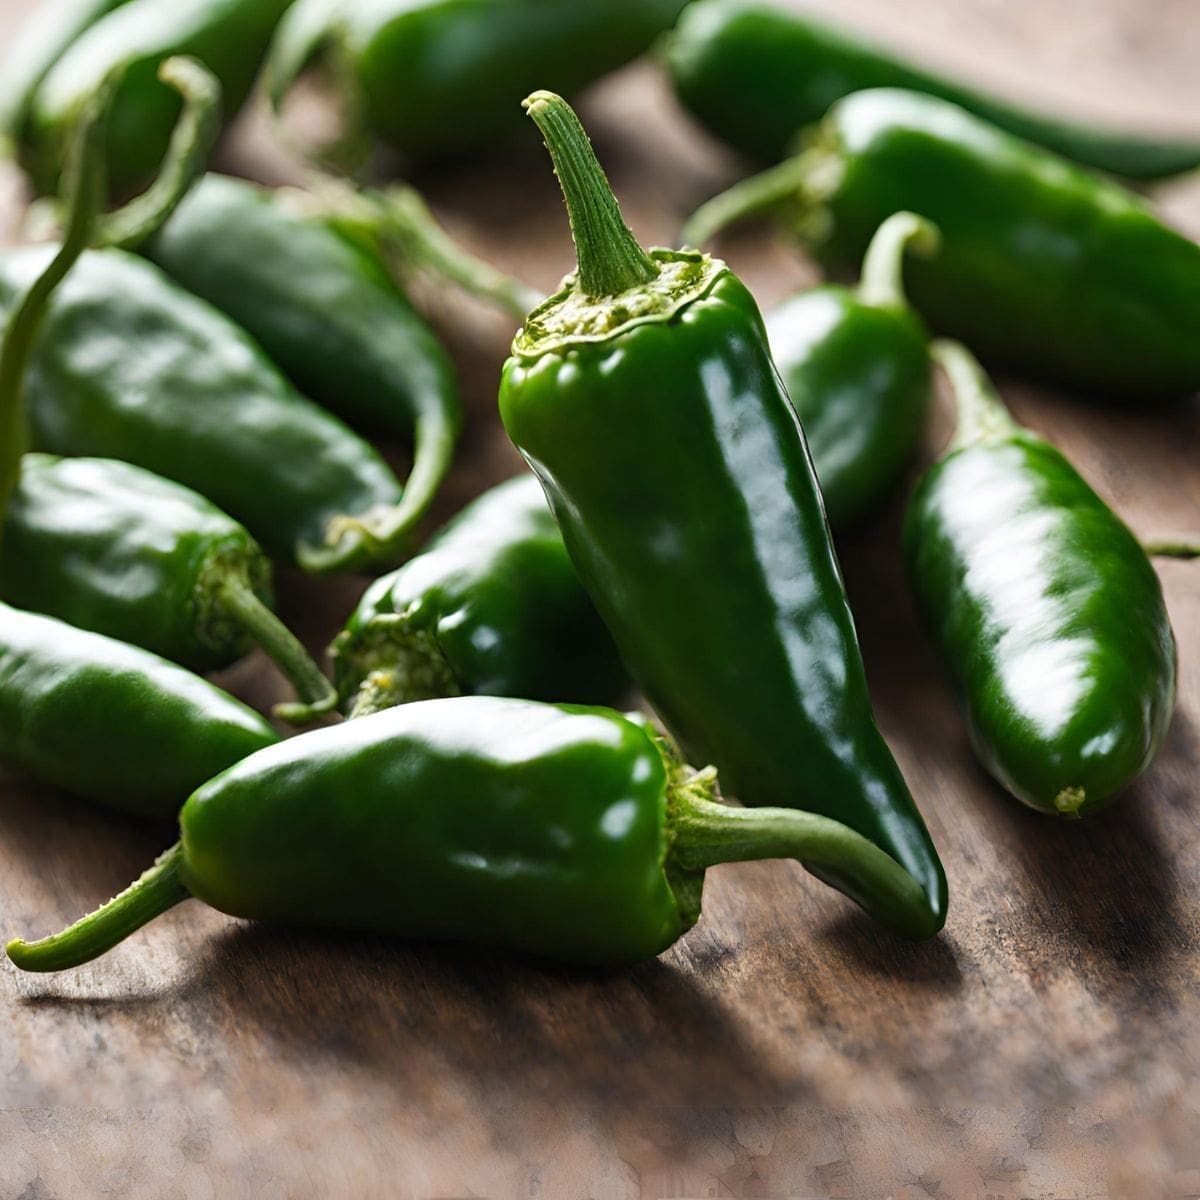 A pile of green jalapeno sits on a wooden table.